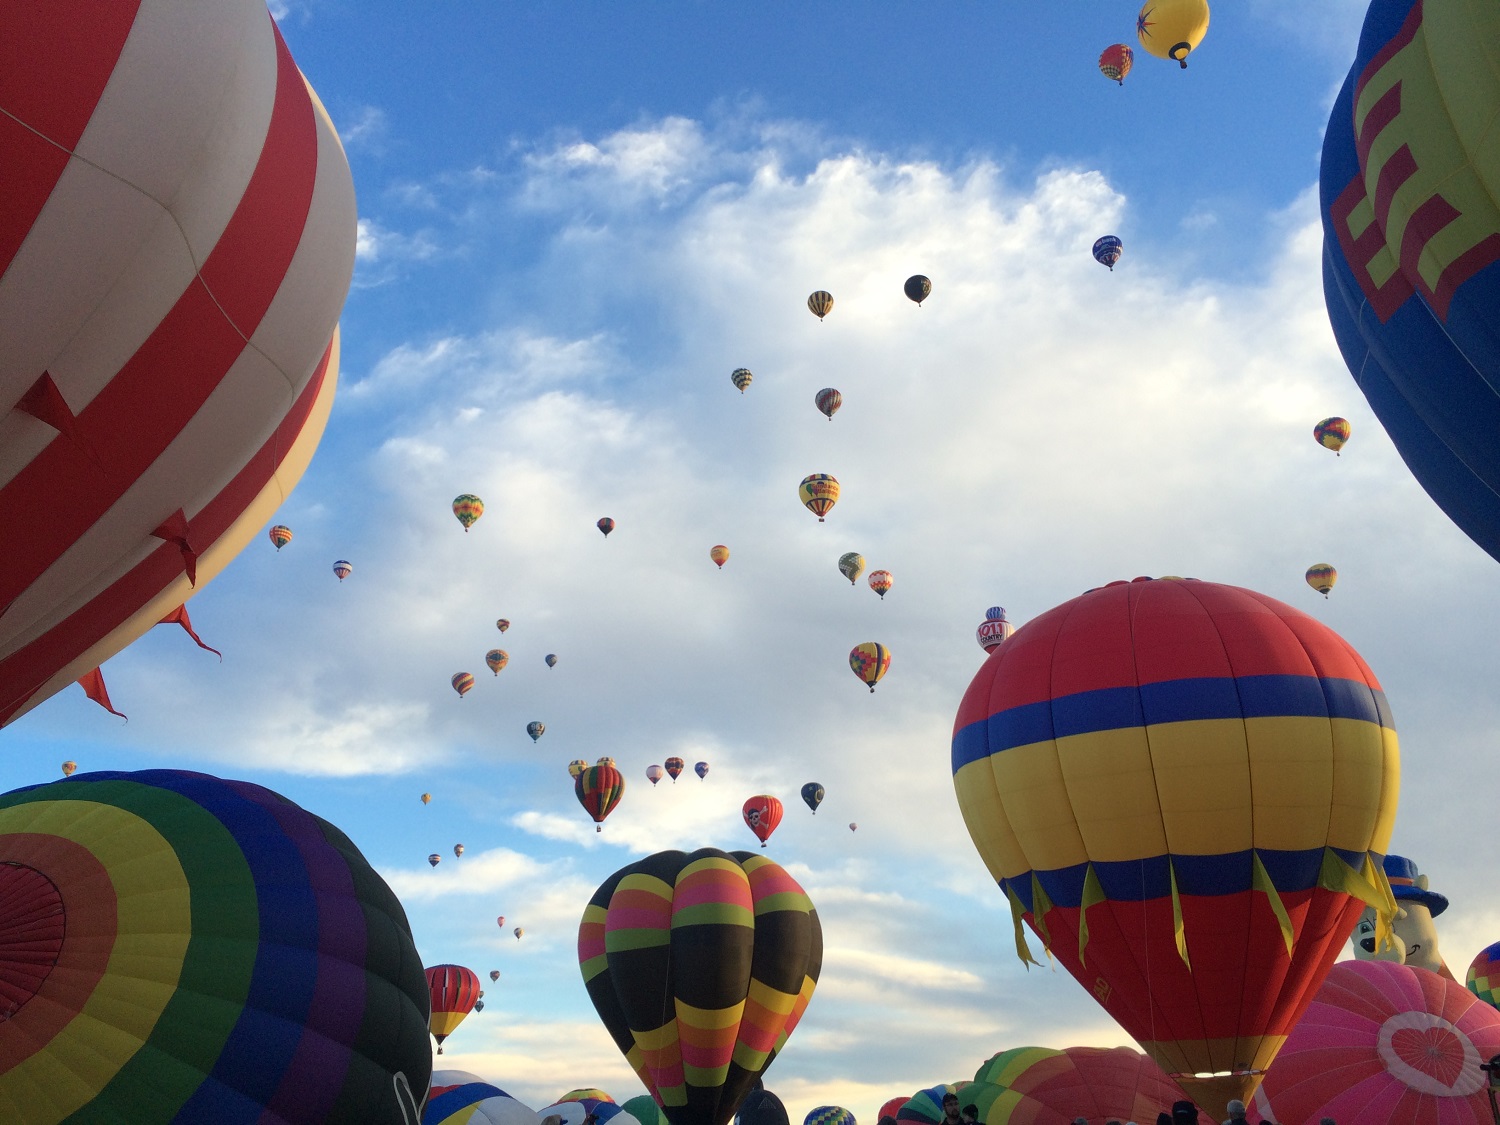 A group of balloons lift off at the same time. (WTOP/Noah Frank)